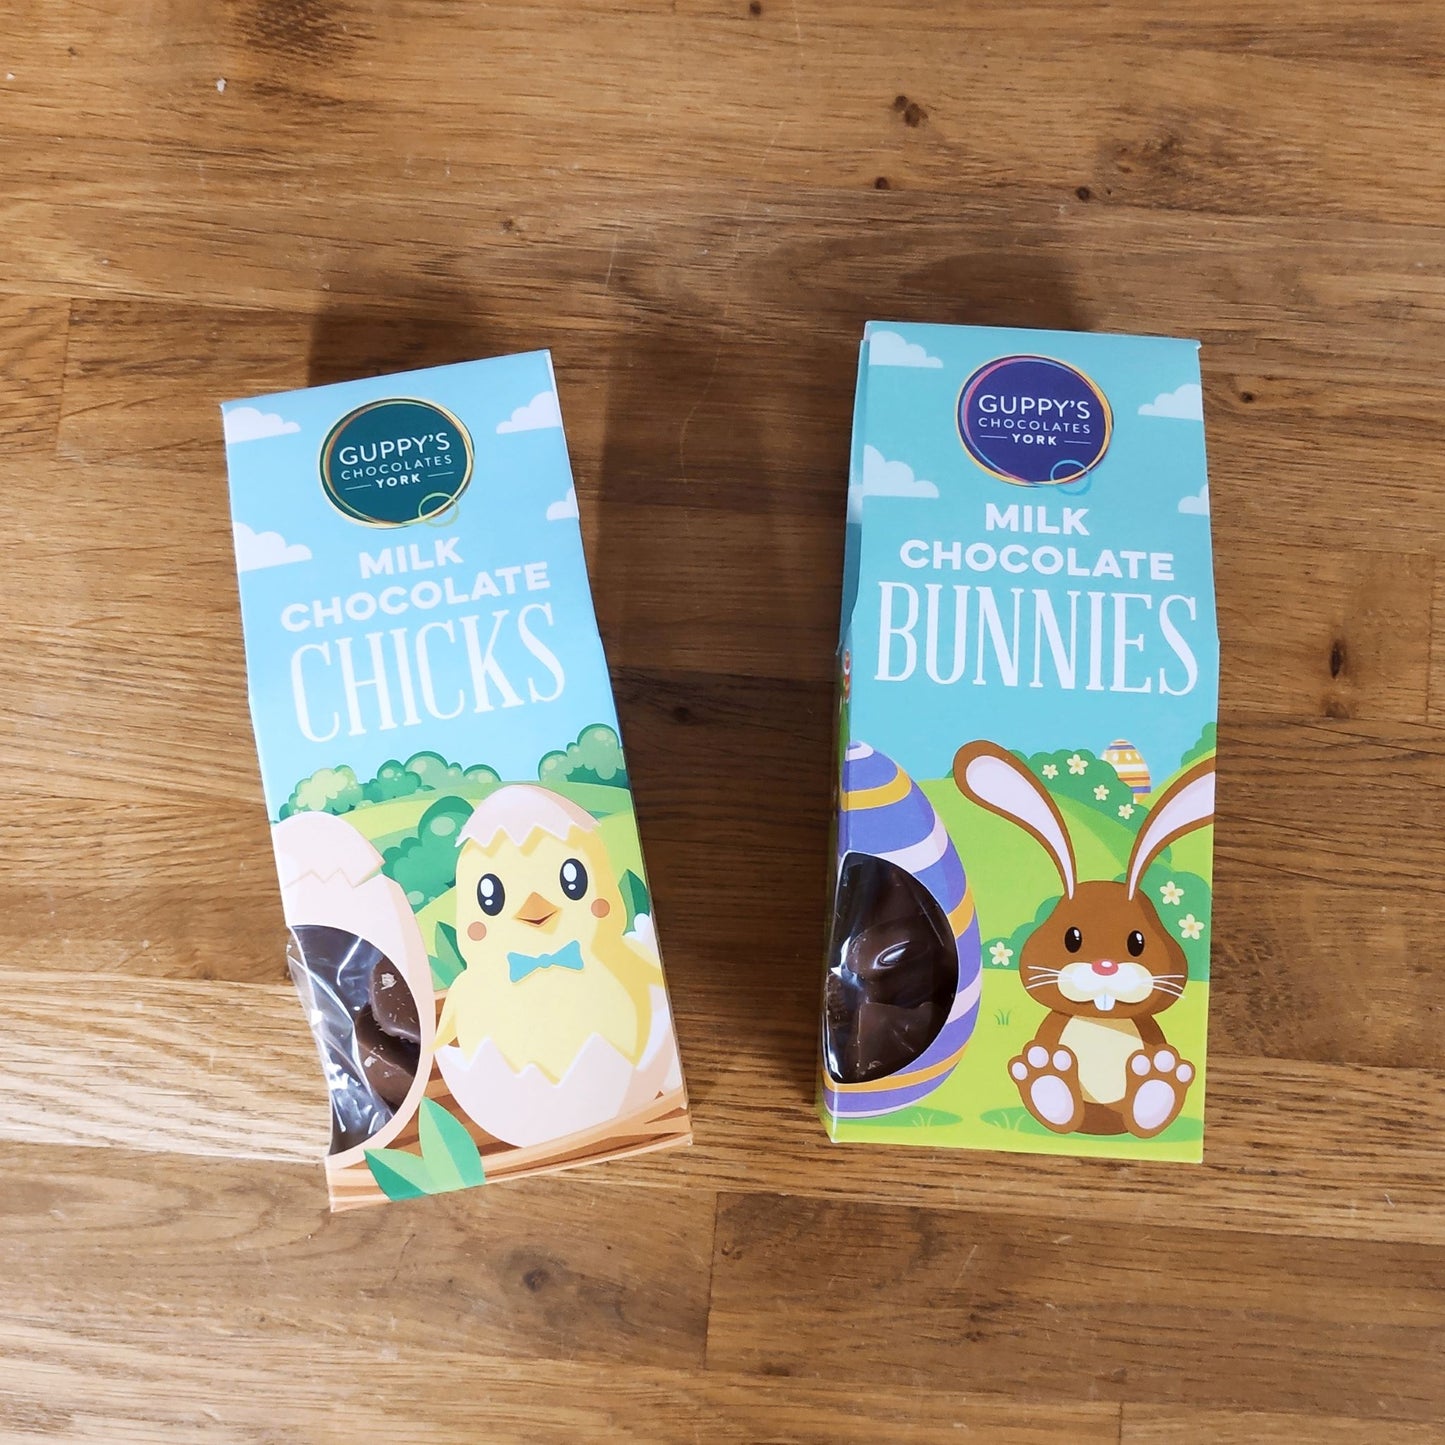 Milk Chocolate Chick and Bunny Shapes